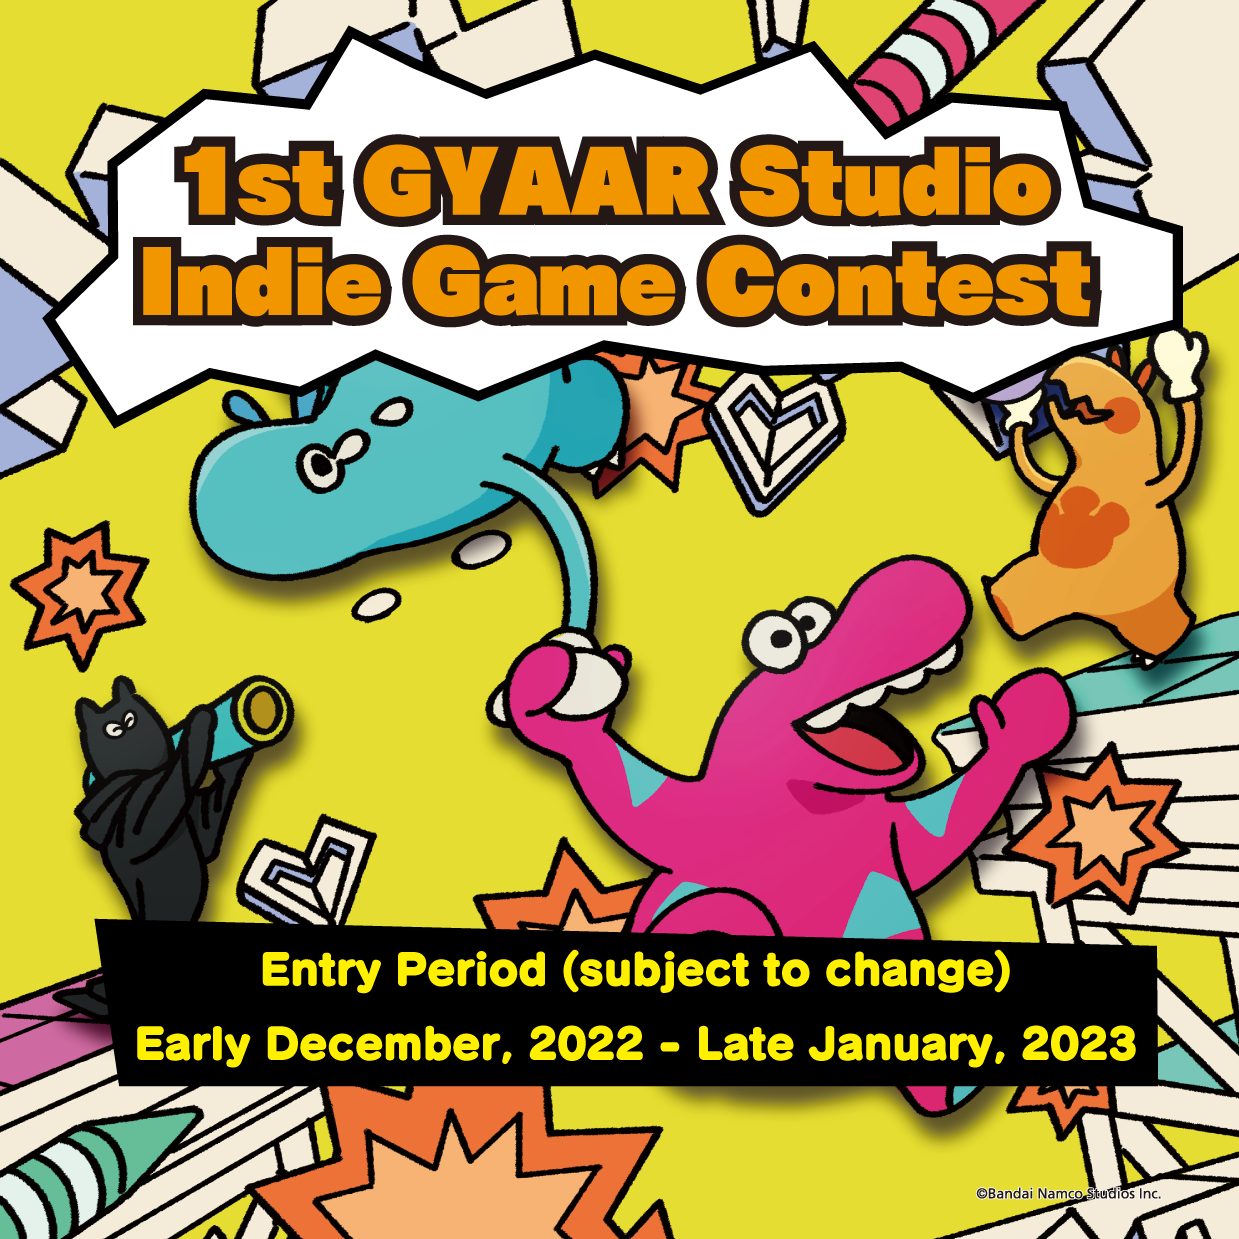 BANDAI NAMCO ANNUNCIA IL PRIMO GYAAR INDIE GAME CONTEST